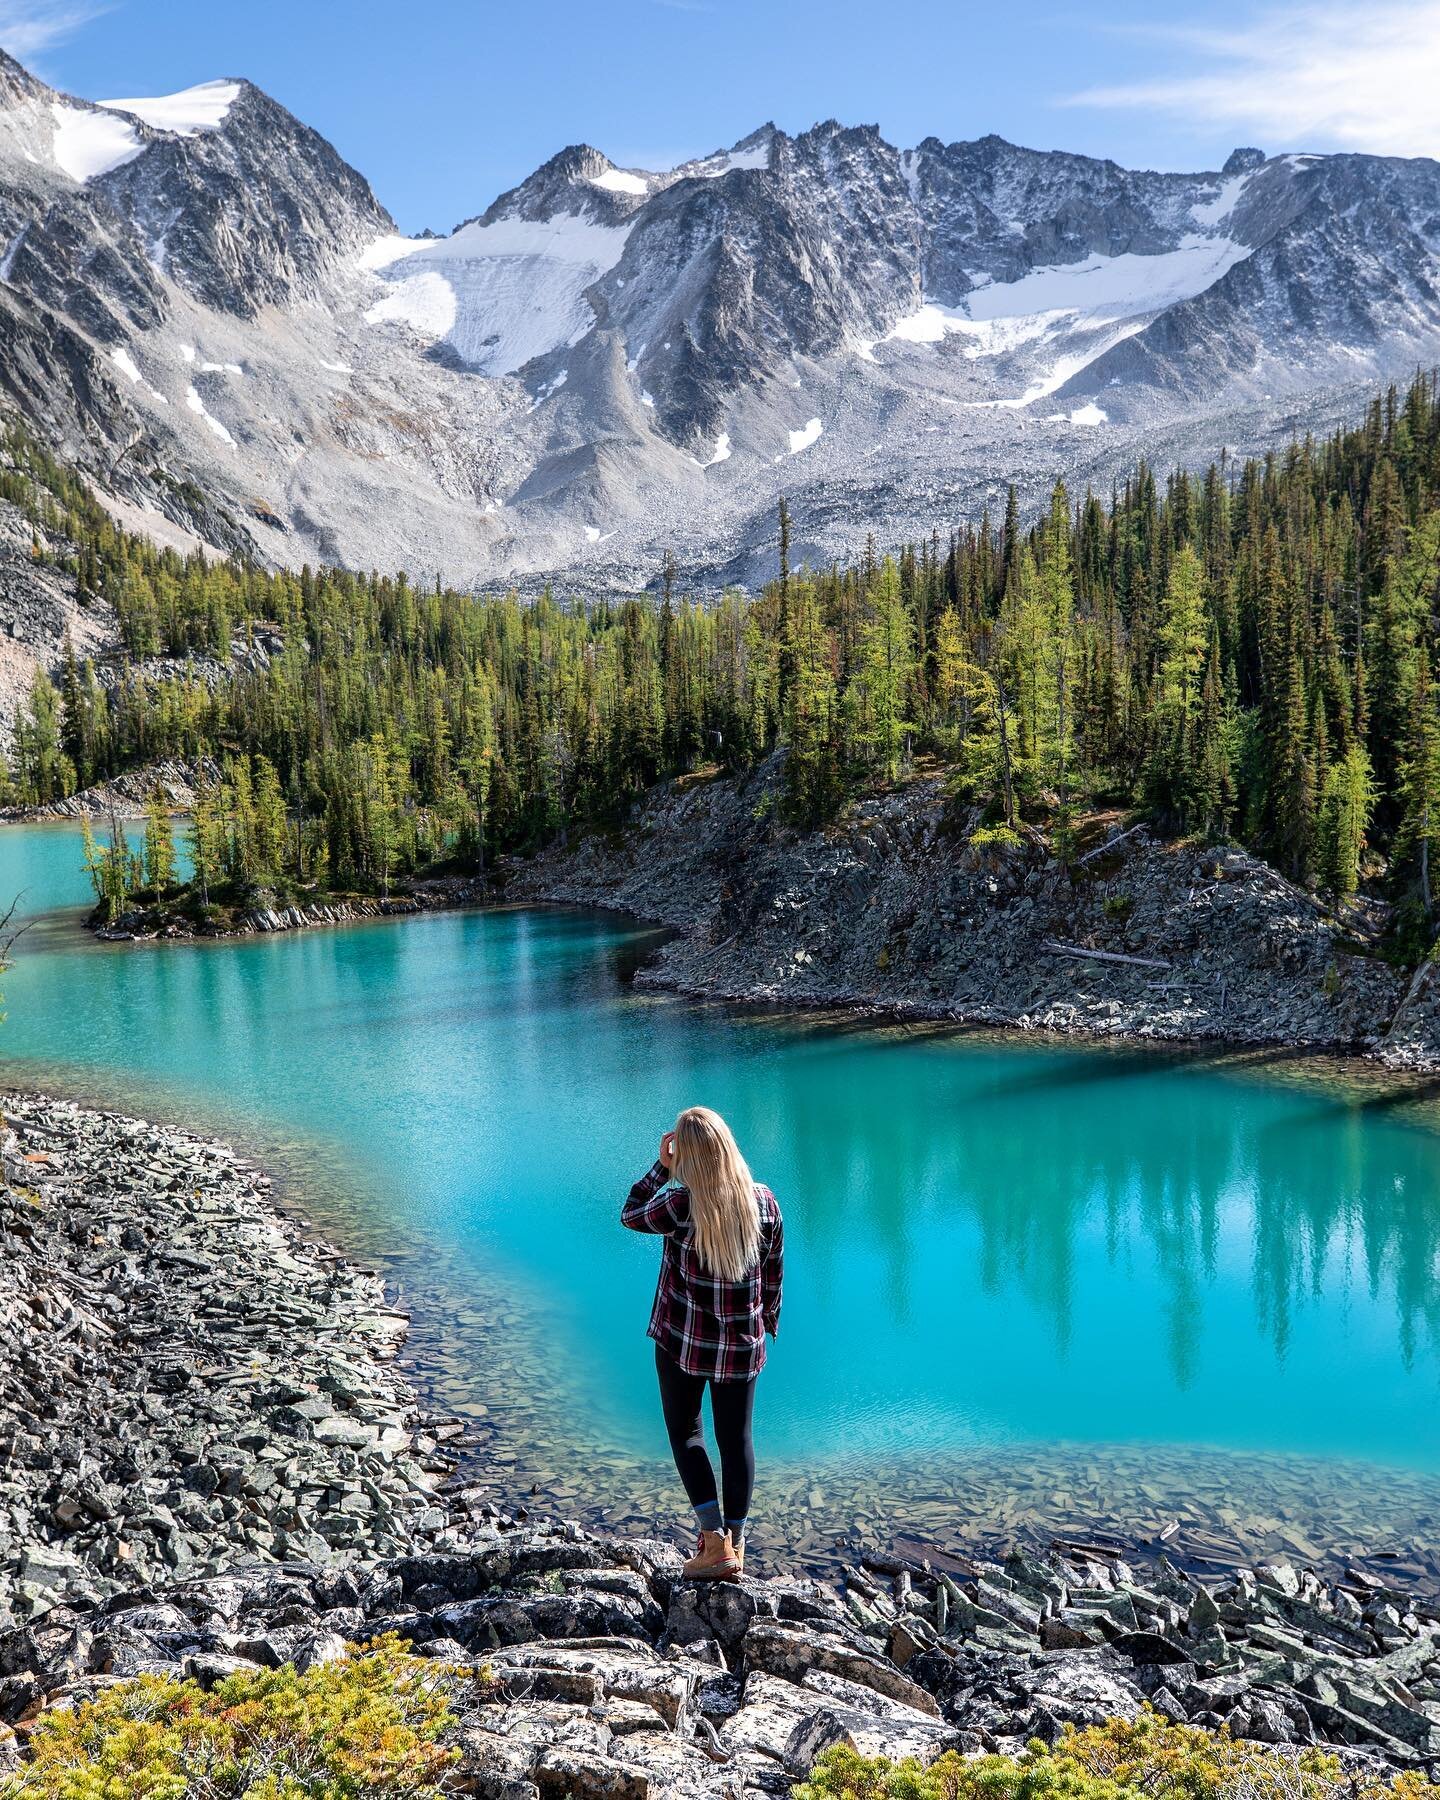 I can&rsquo;t believe it&rsquo;s already March 1st! The month that felt like it lasted forever last year has arrived and with it a week of very springlike temperatures in the Rockies. So naturally although still a few months away, summer adventures a